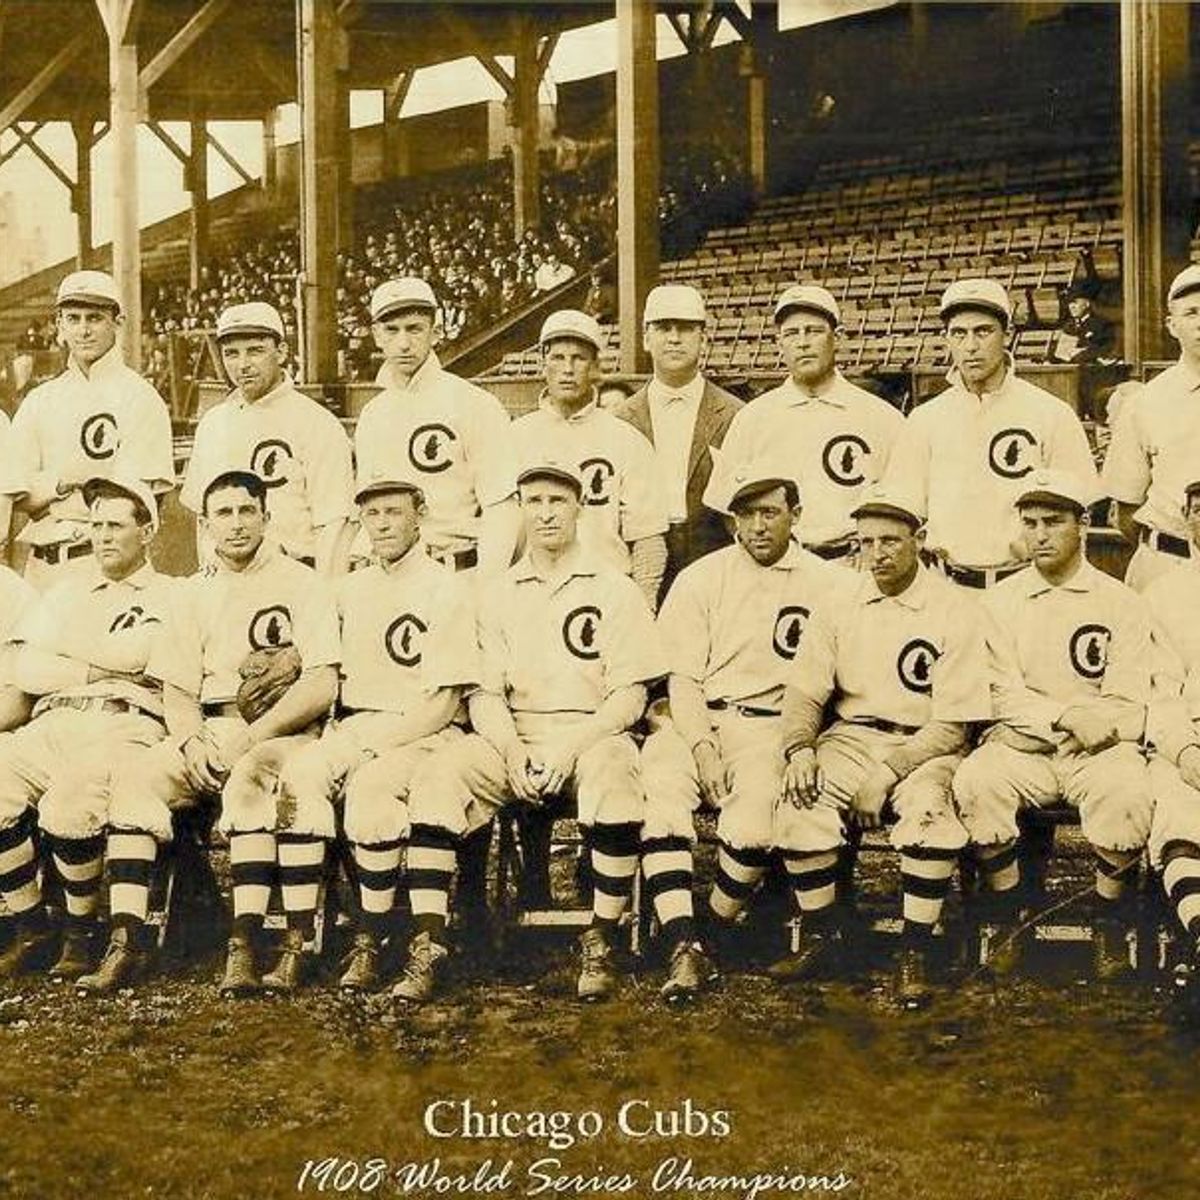 1908 Pirates-Cubs Pennant Controversy